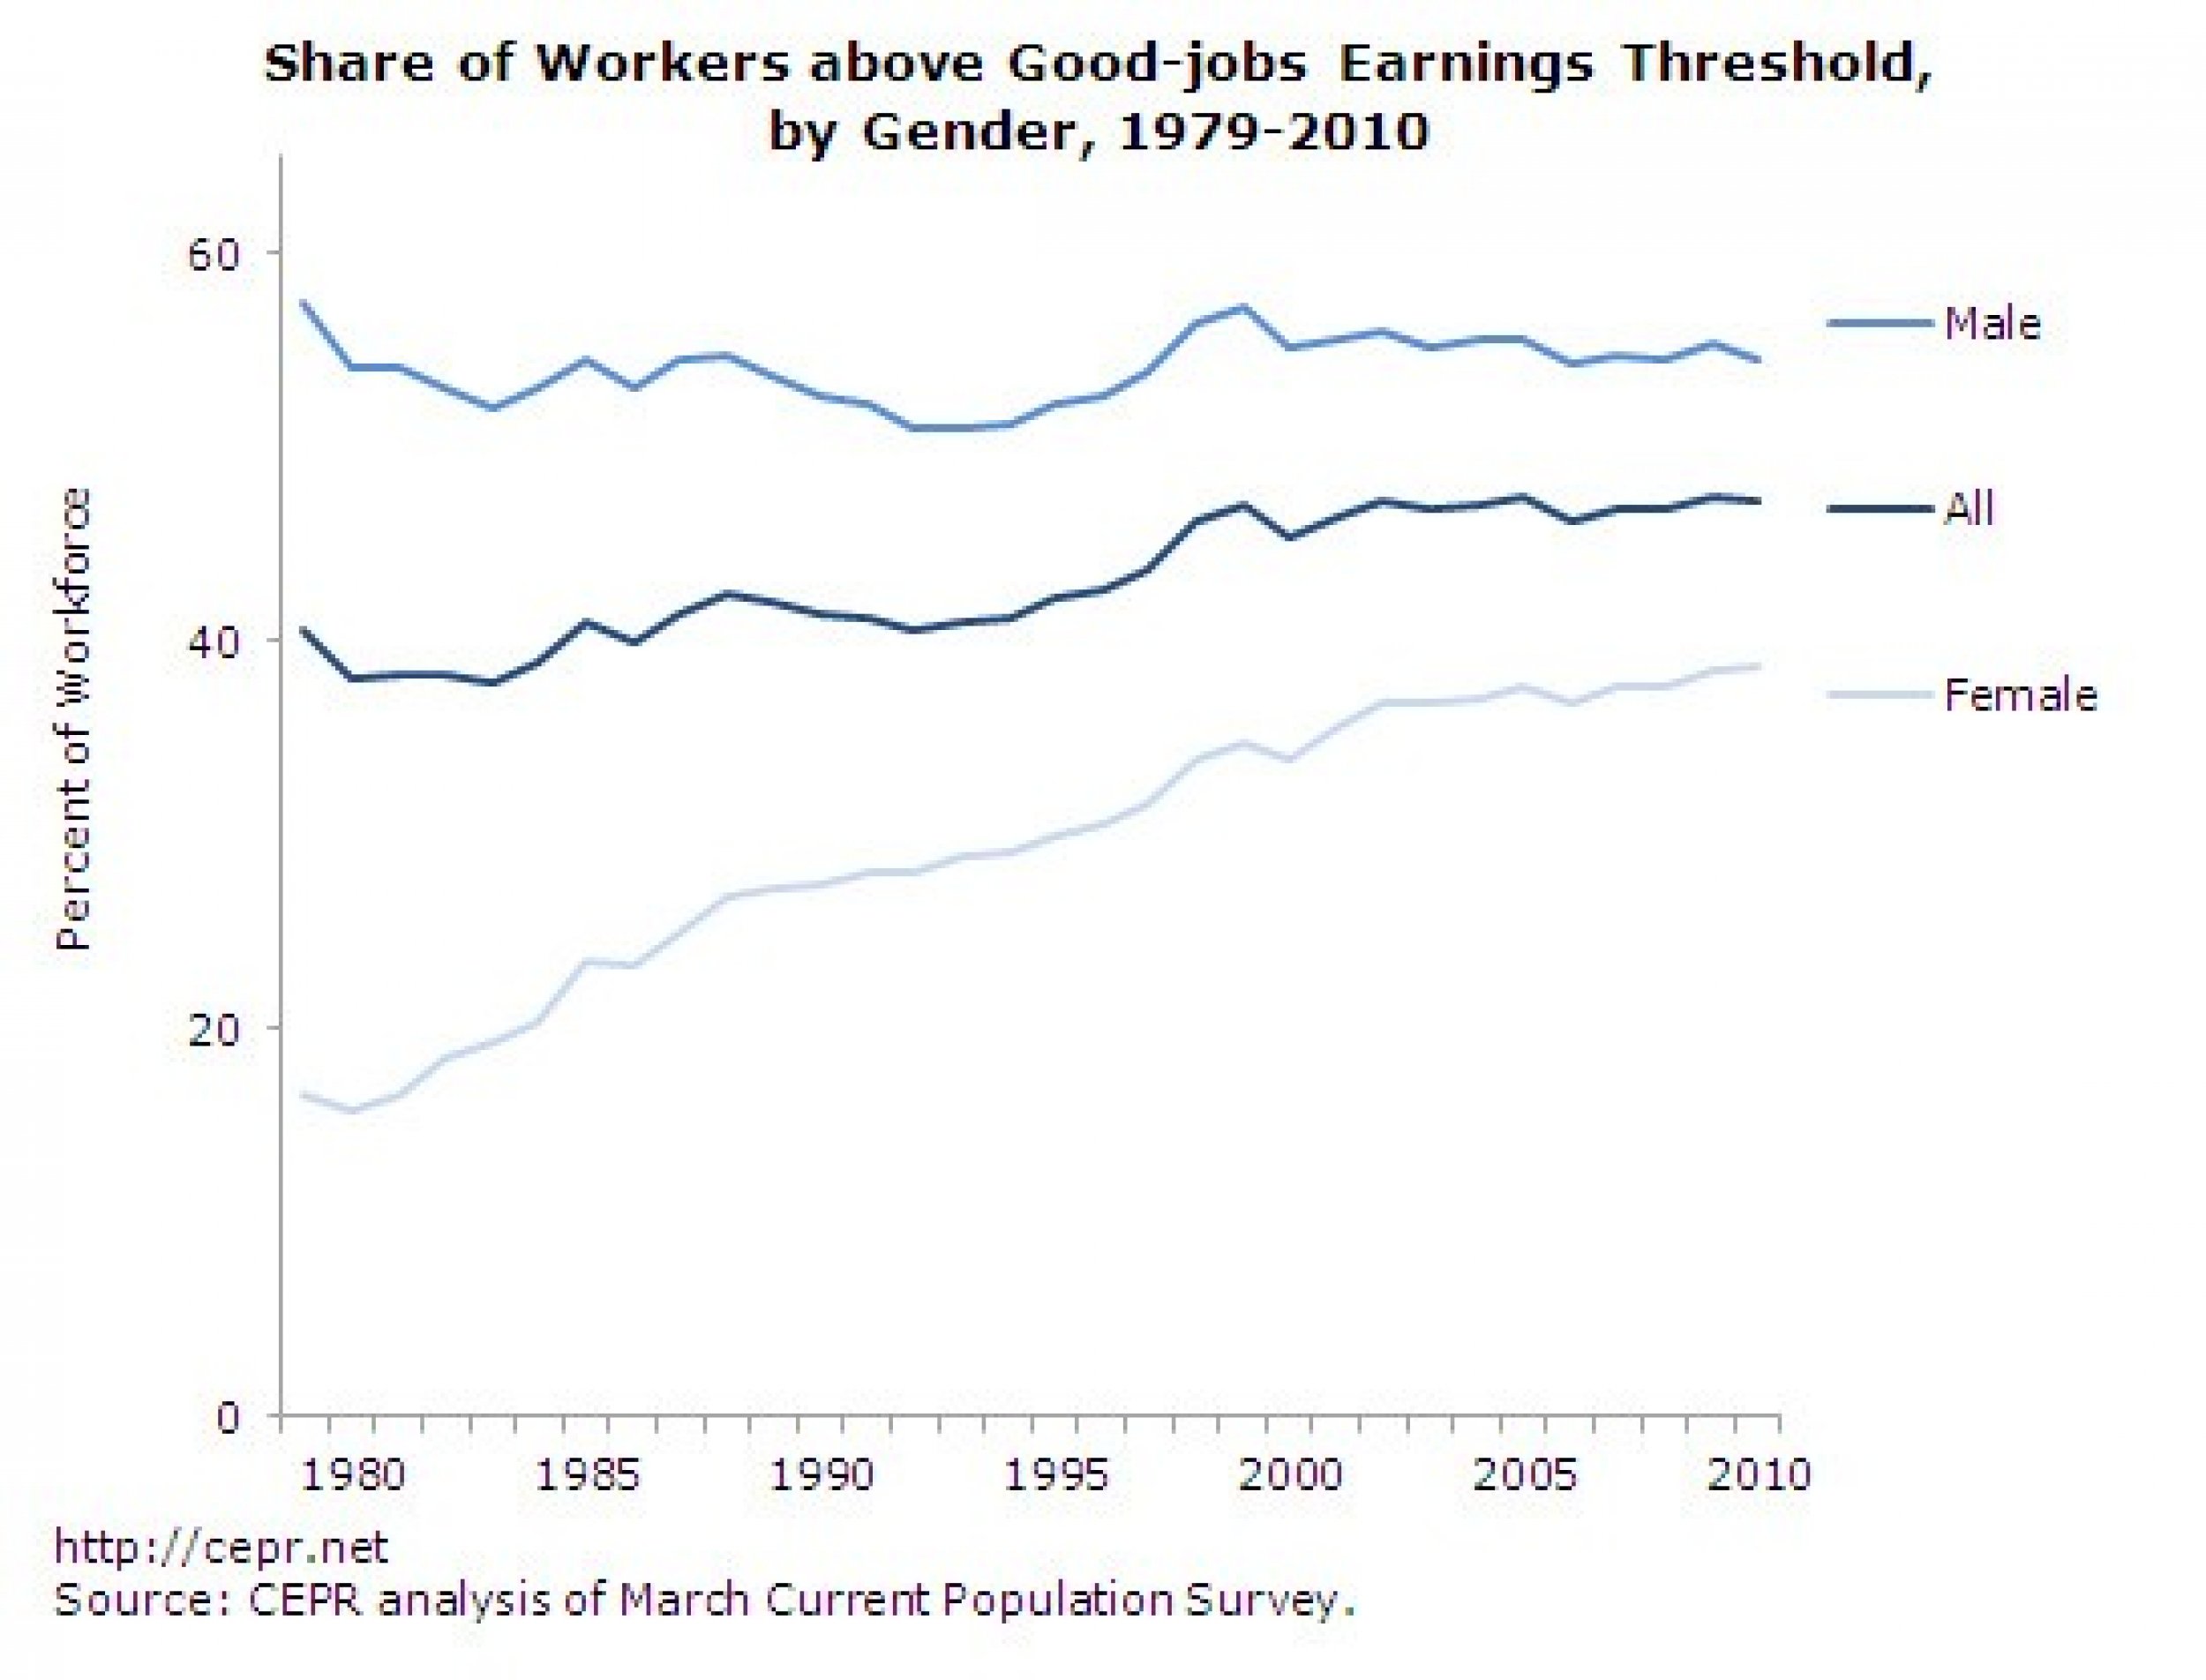 Share of Workers above Good-jobs Earnings Threshold, by Gender, 1979-2010